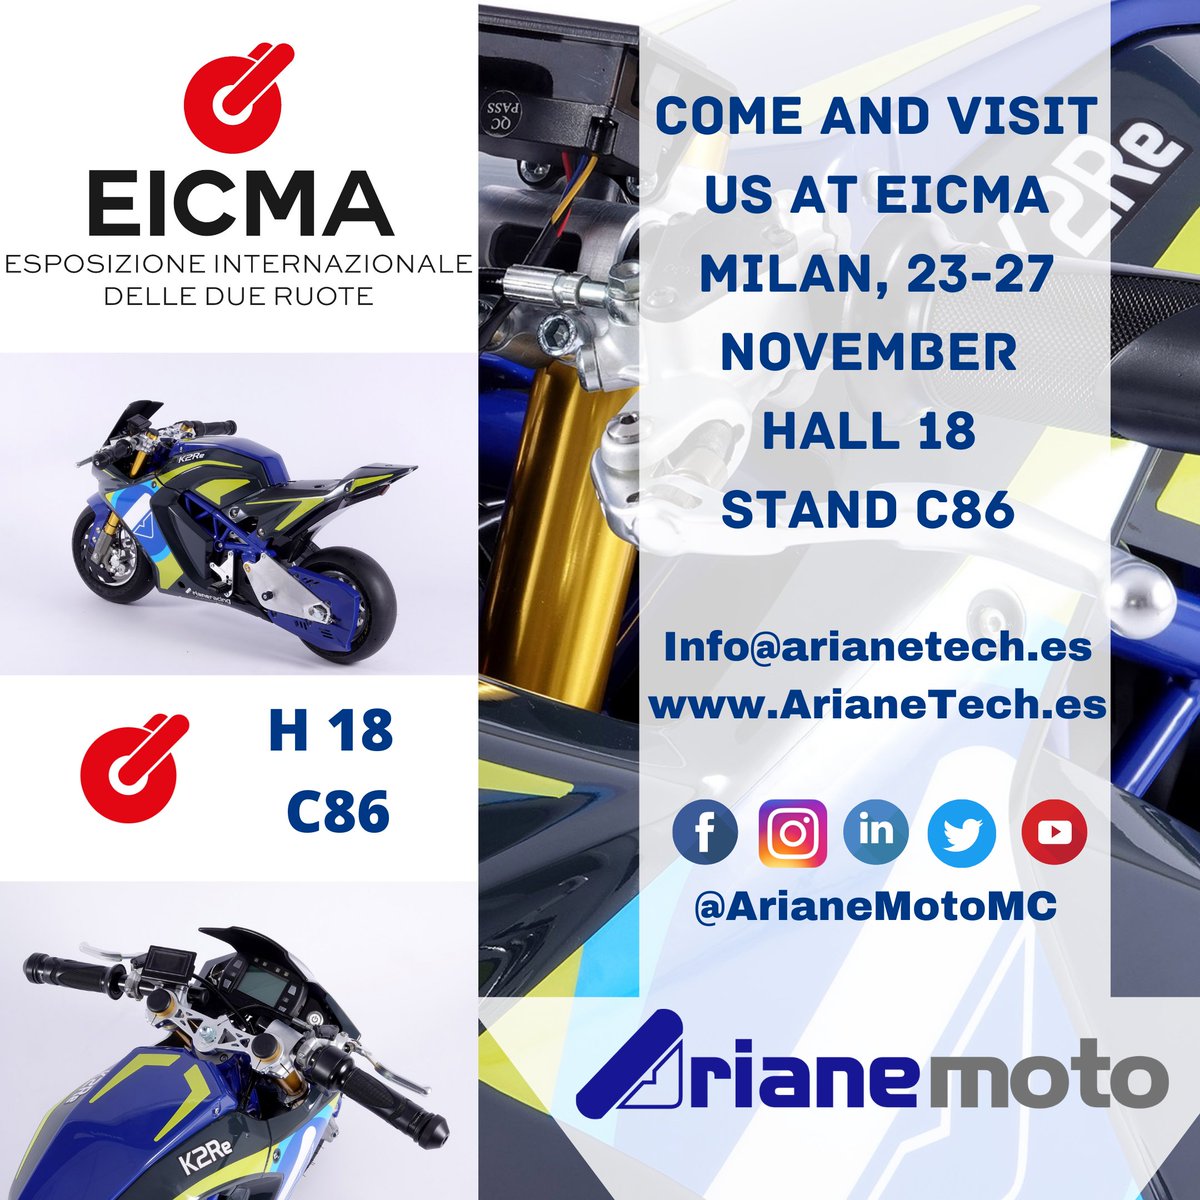 ArianeMoto will attend EICMA from November 23rd to 28th at pad.18, stand C86
Do not hesitate to contact us to schedule a meeting and visit us to discover the new Ariane K2Re Electric Minibike.
#EICMA2021 #electricpocketbike #electricbike  #minibike #eicma #ArianeMoto #arianek2re